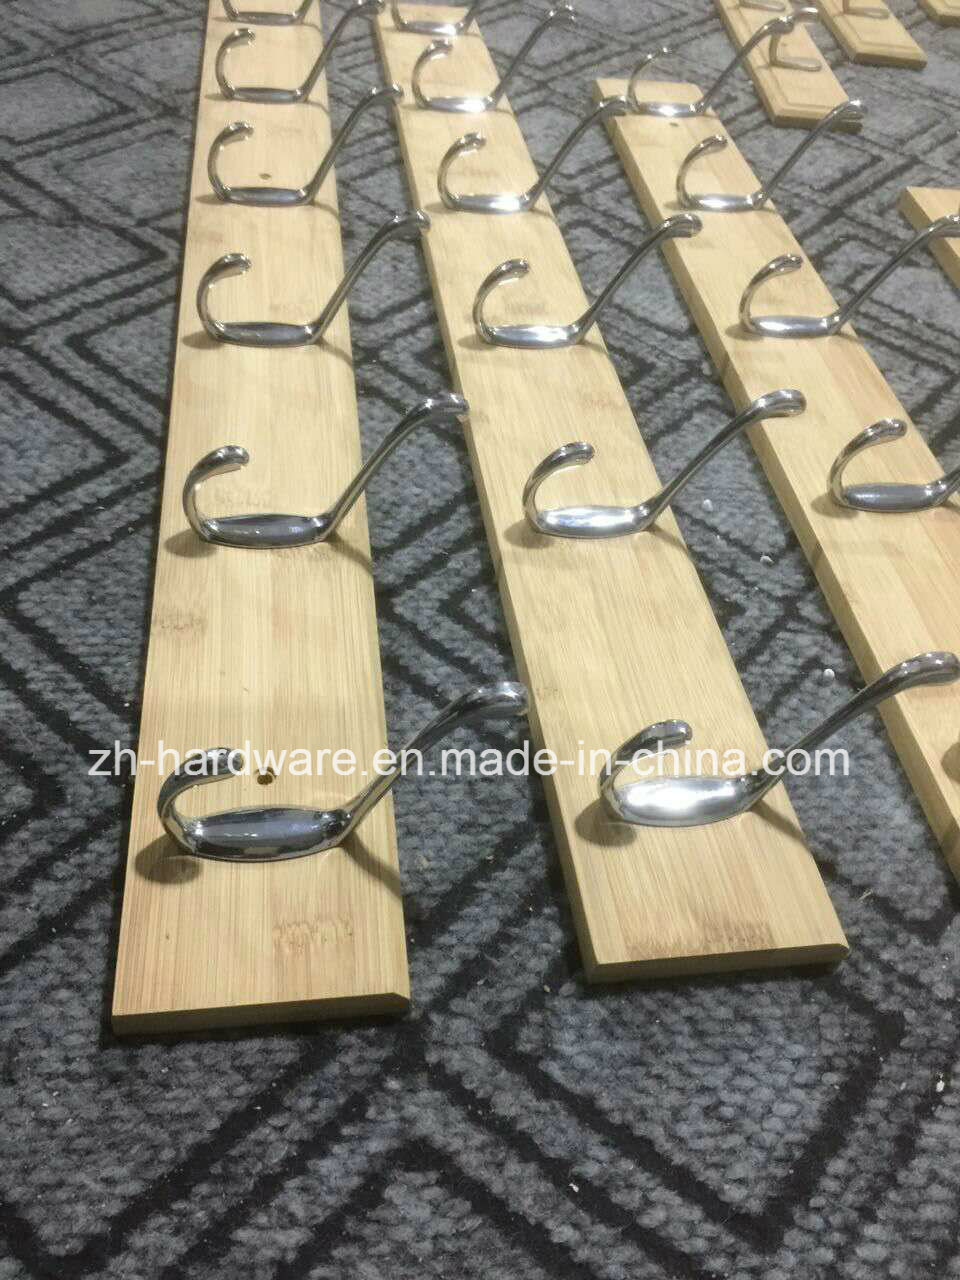 /proimages/2f0j00BJftNTKPbHbD/high-quality-bamboo-and-wood-rows-of-coat-hook-zh-h001-.jpg